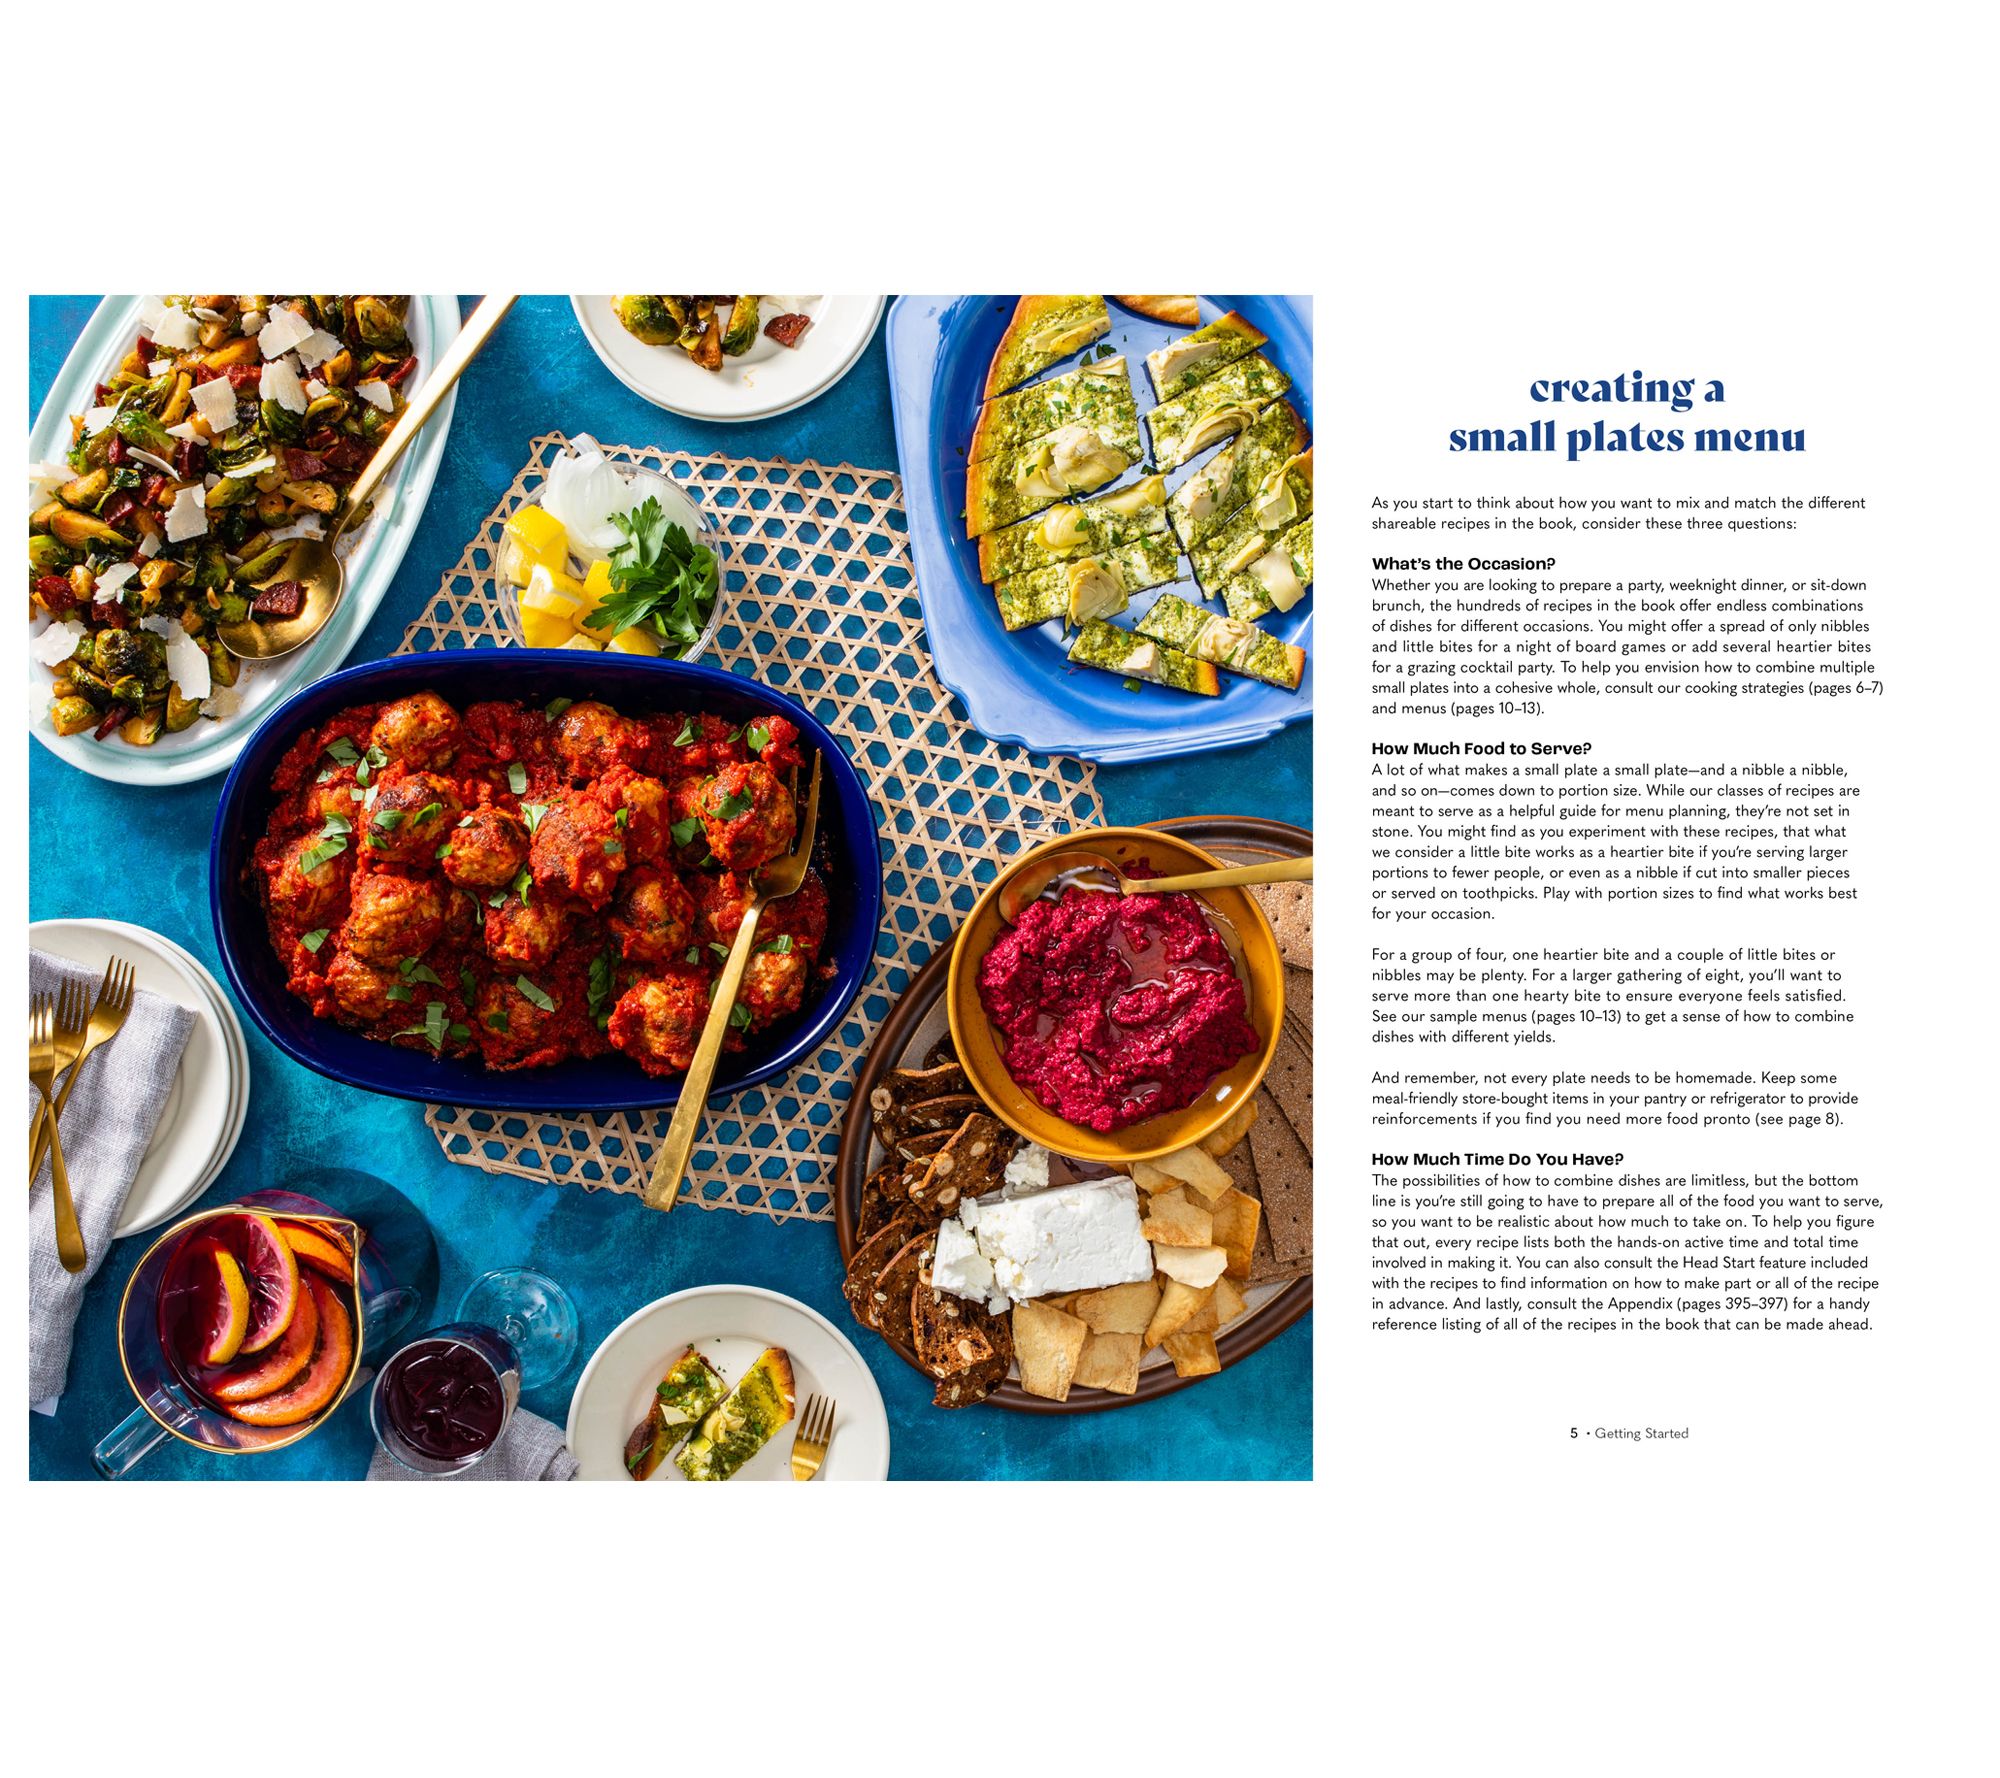 The Complete Small Plates Cookbook by America's Test Kitchen